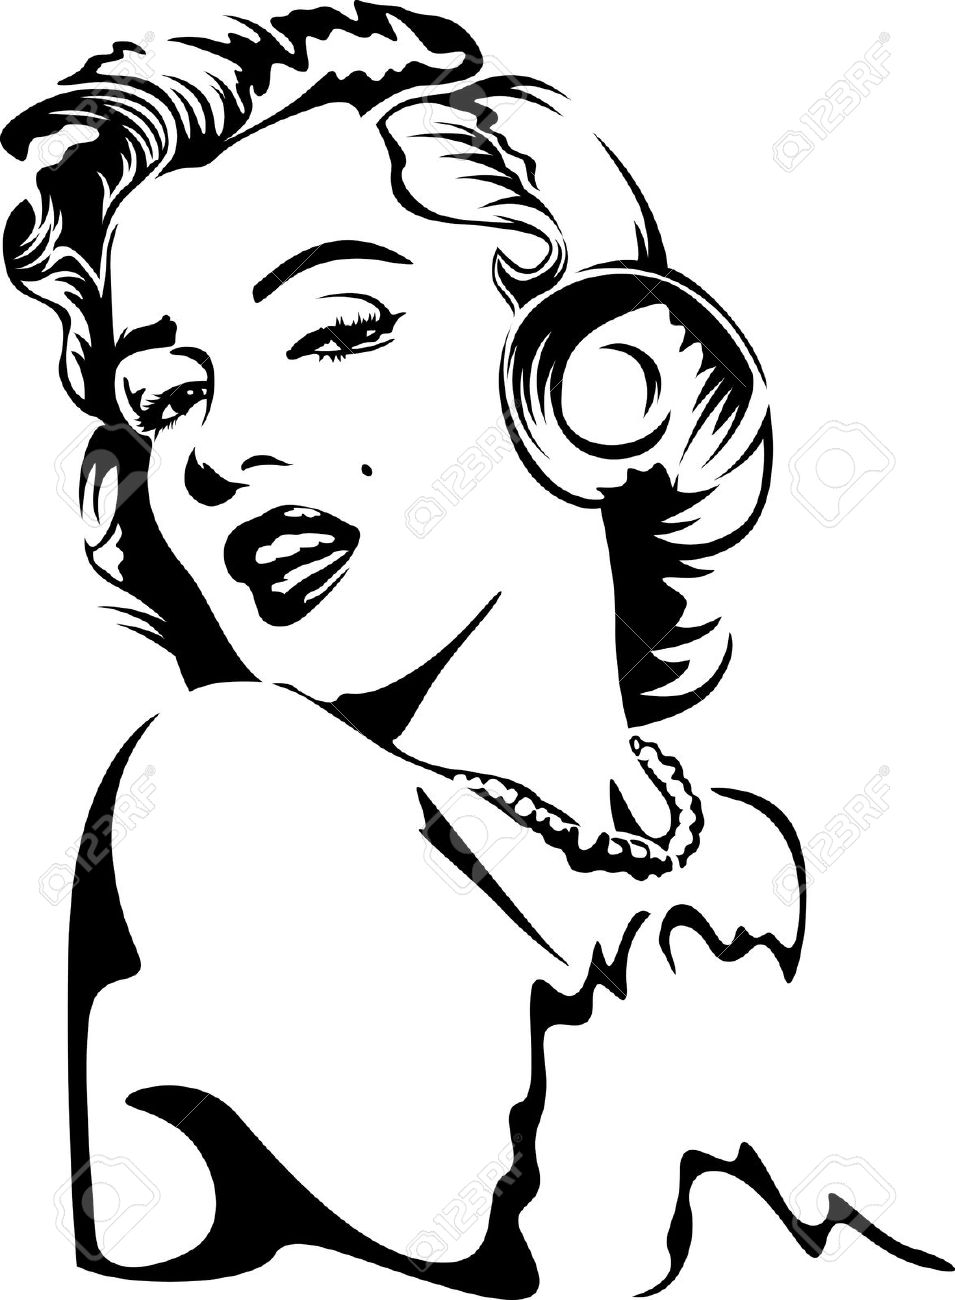 Marilyn monroe clipart - Clipground